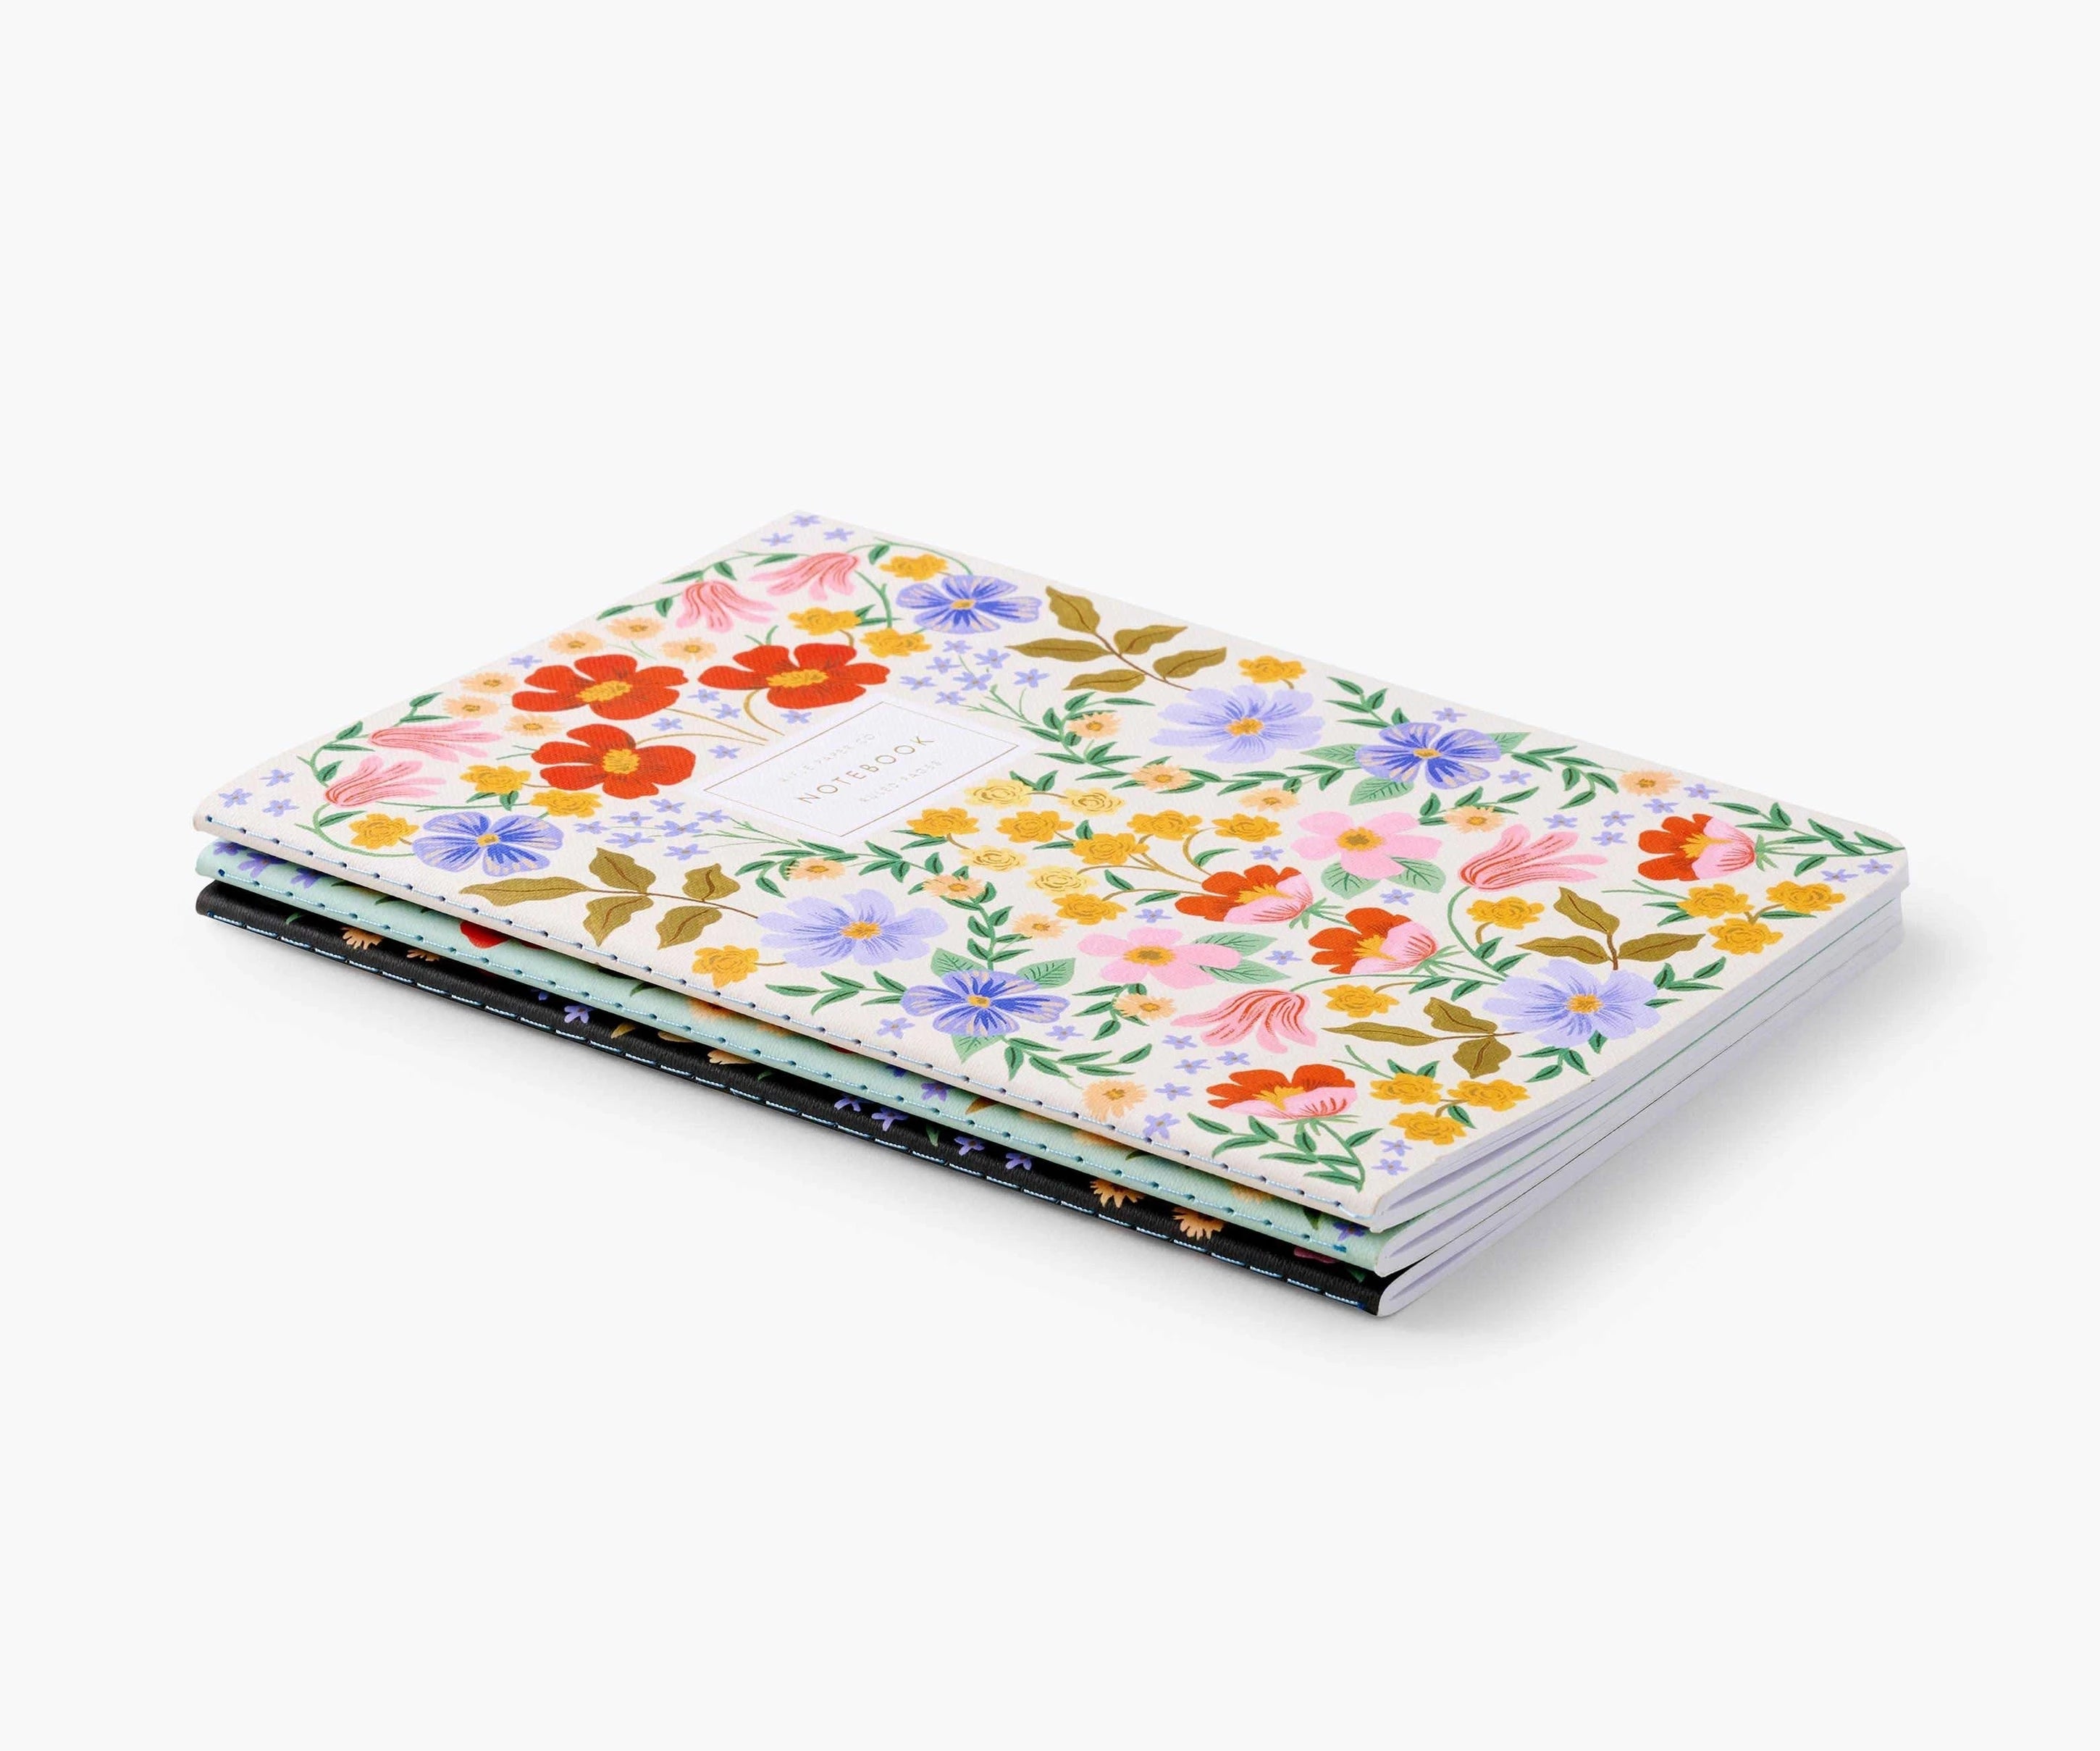 3 floral notebooks lying flat